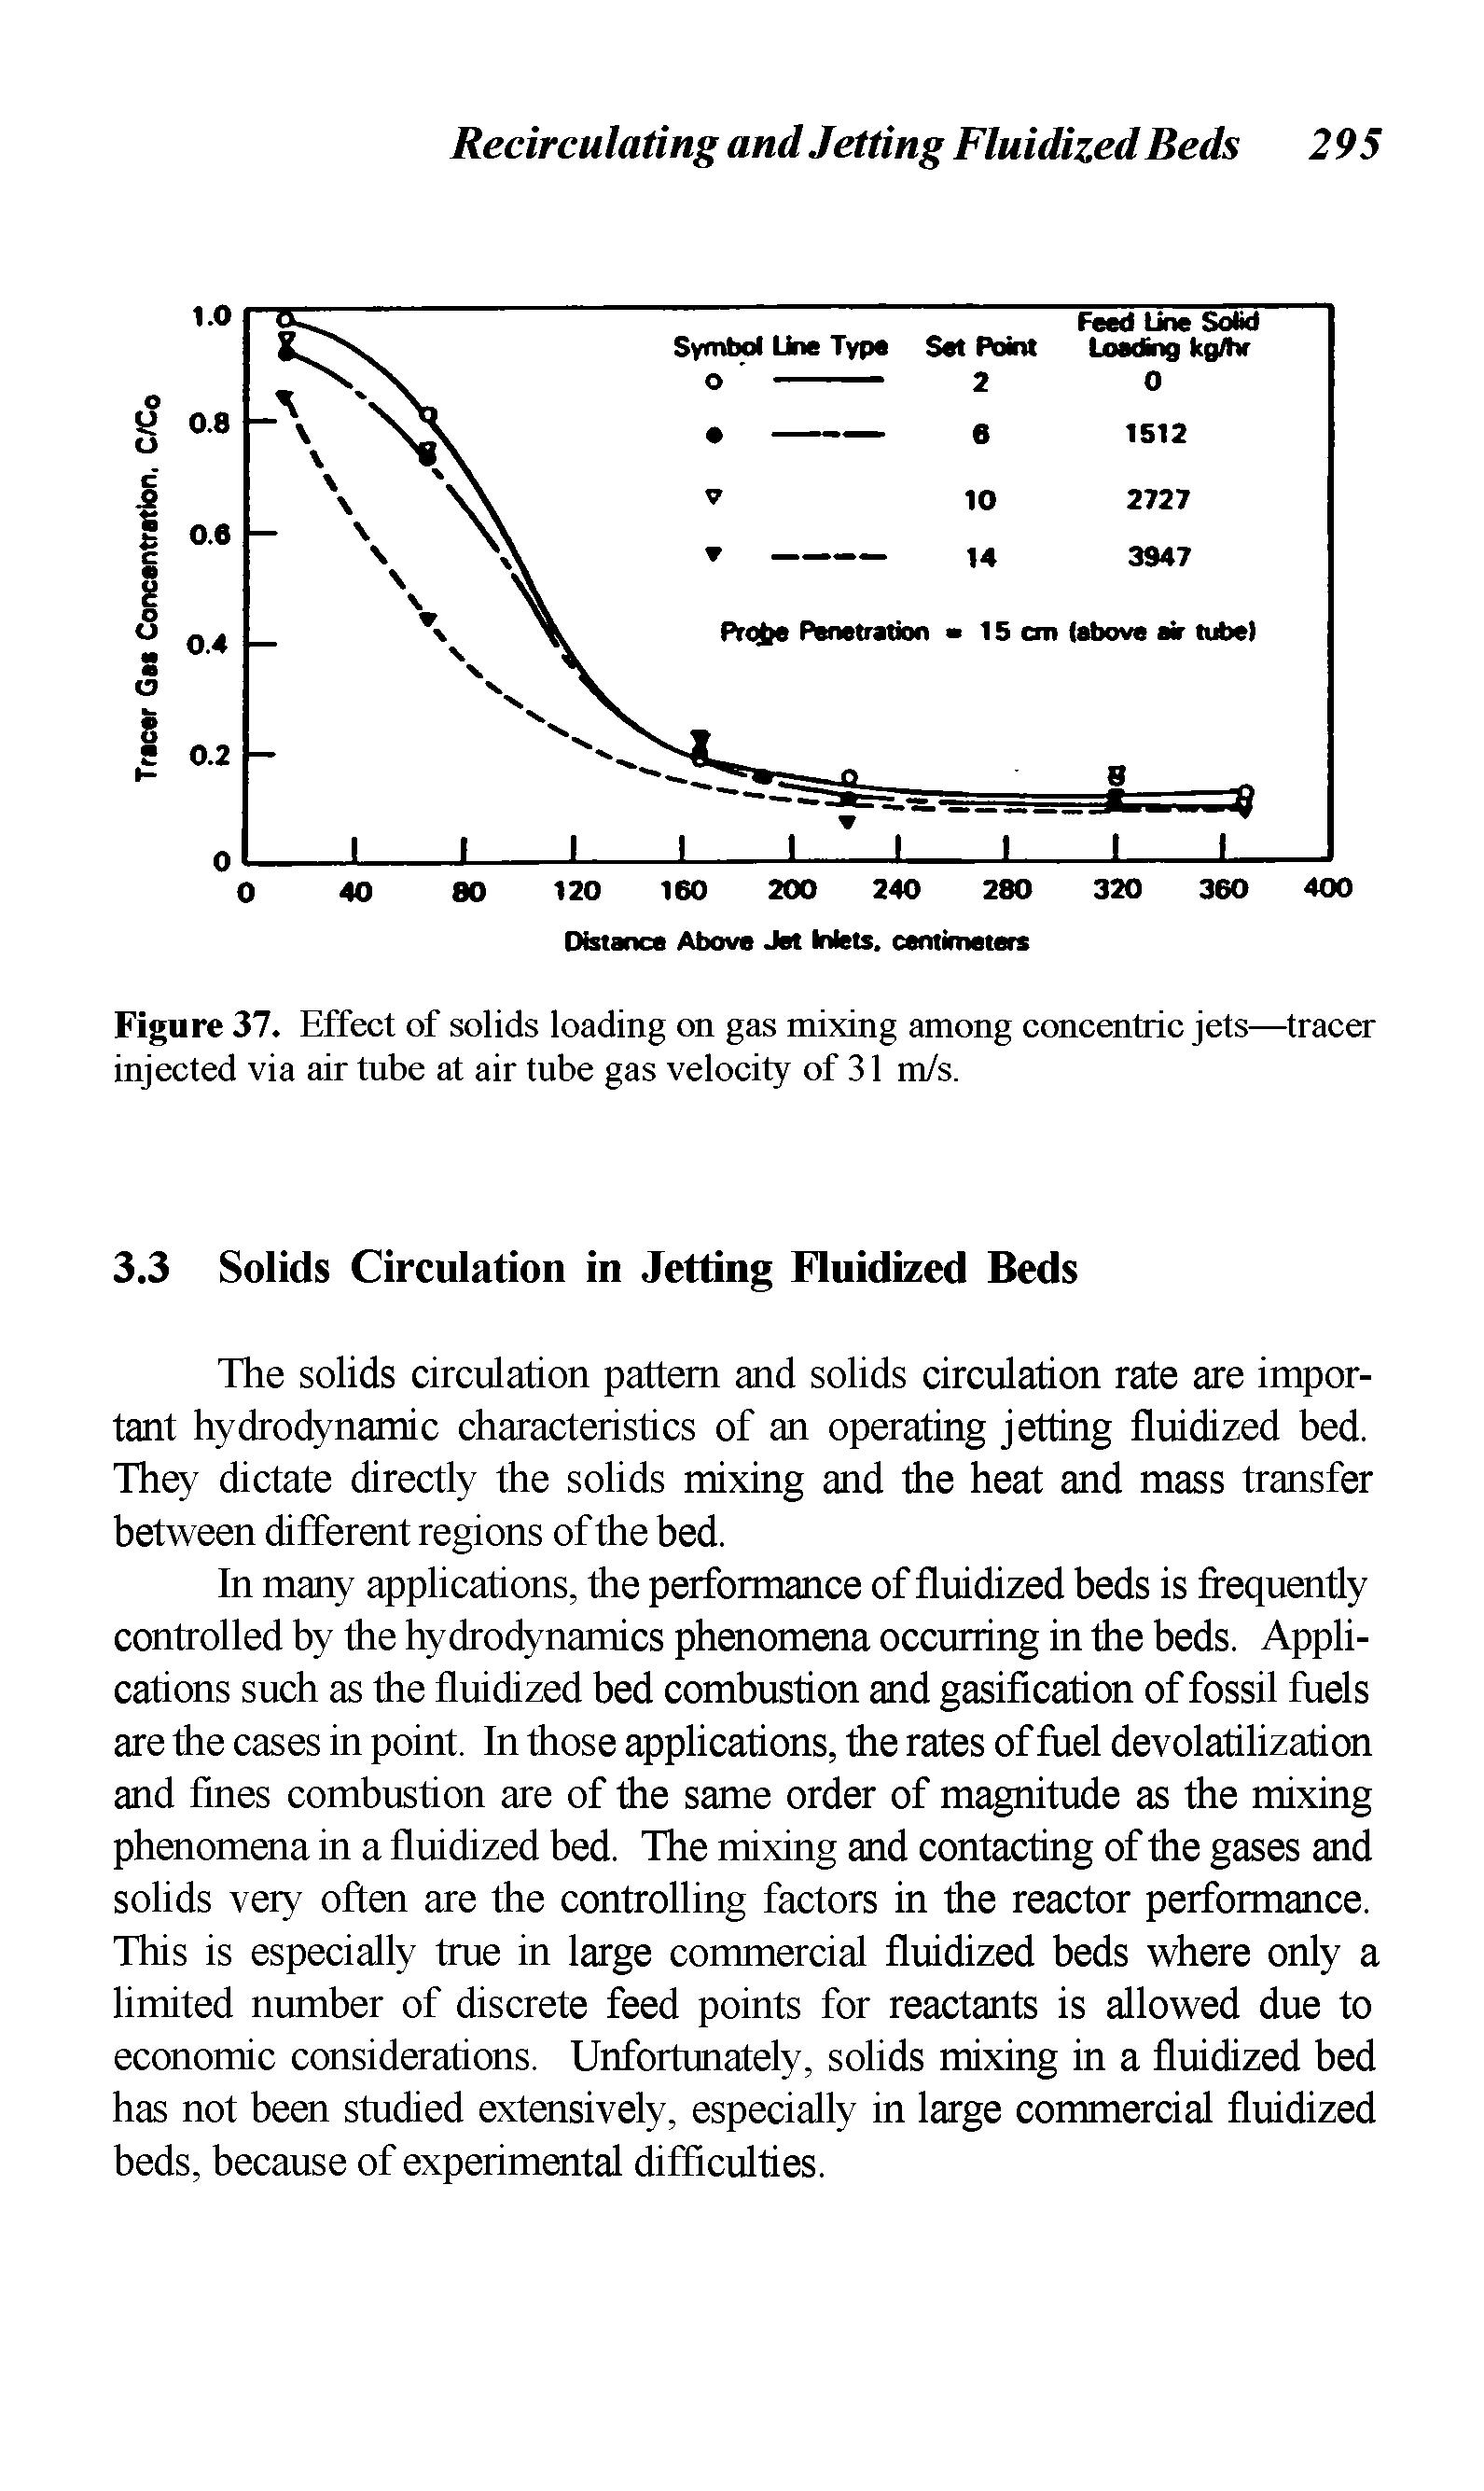 Figure 37. Effect of solids loading on gas mixing among concentric jets—tracer injected via air tube at air tube gas velocity of 31 m/s.